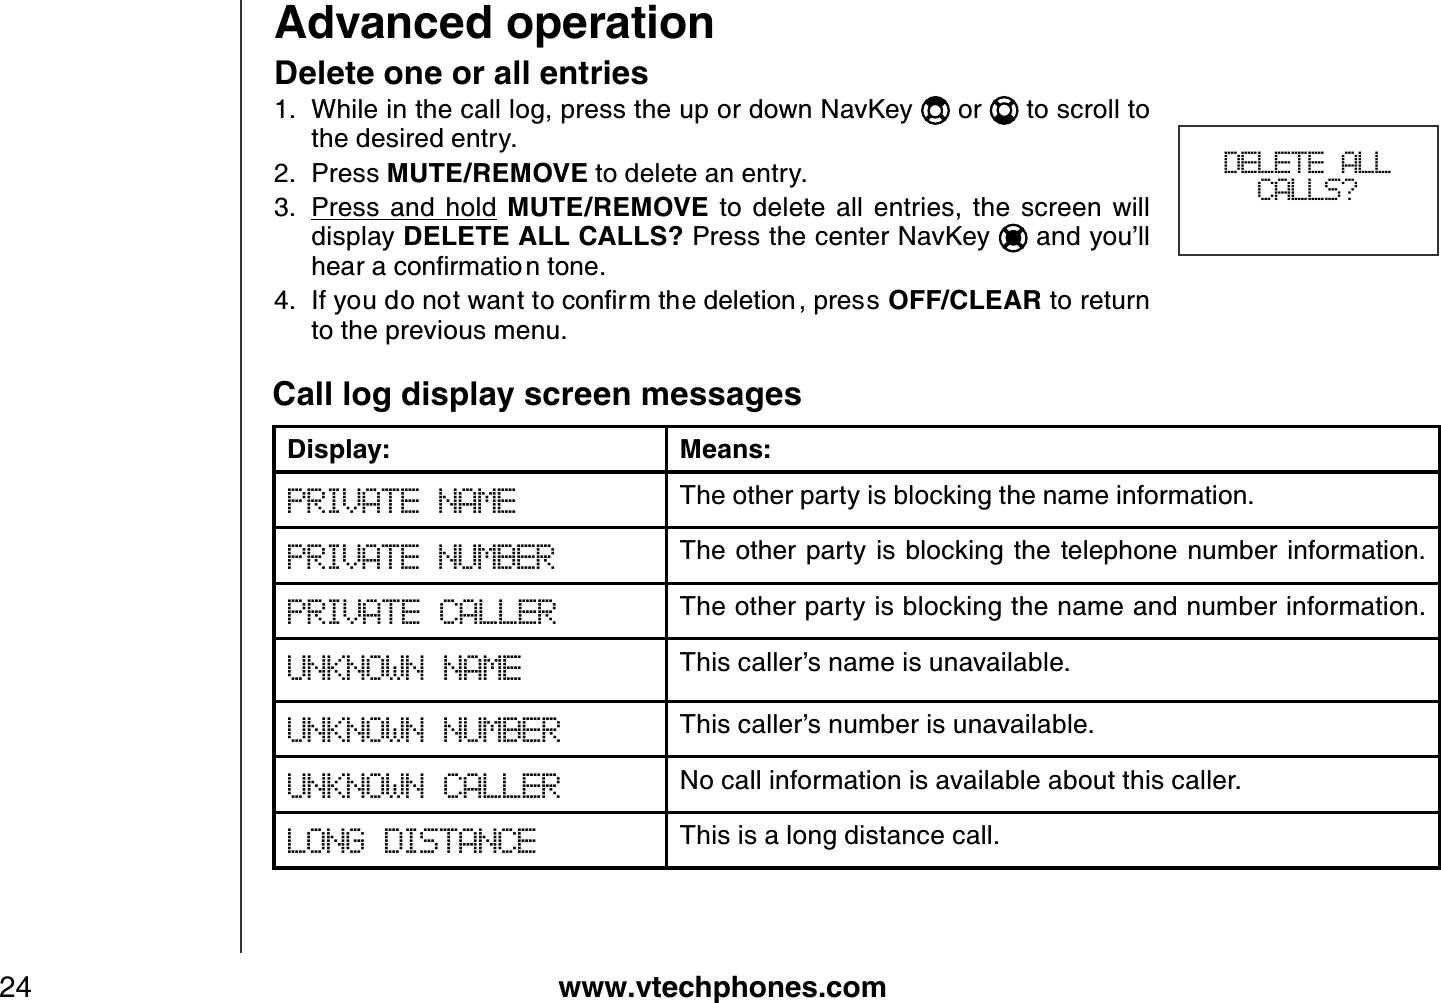 www.vtechphones.com24Advanced operationCall log display screen messagesDisplay: Means:PRIVATE NAME The other party is blocking the name information.PRIVATE NUMBER The other party is blocking the telephone number  information.PRIVATE CALLER The other party is blocking the name and number information. UNKNOWN NAME This caller’s name is unavailable. UNKNOWN NUMBER This caller’s number is unavailable.UNKNOWN CALLER No call information is available about this caller.LONG DISTANCE This is a long distance call. Delete one or all entriesWhile in the call log, press the up or down NavKey   or   to scroll to the desired entry.Press MUTE/REMOVE to delete an entry. Press  and  hold MUTE/REMOVE  to  delete  all  entries,  the  screen  will display DELETE ALL CALLS? Press the center NavKey   and you’ll JGCTCEQPſTOCVKQPVQPG+H[QWFQPQVYCPVVQEQPſTOVJGFGNGVKQP RTGUUOFF/CLEAR to return to the previous menu.1.2.3.4.DELETE ALL CALLS?